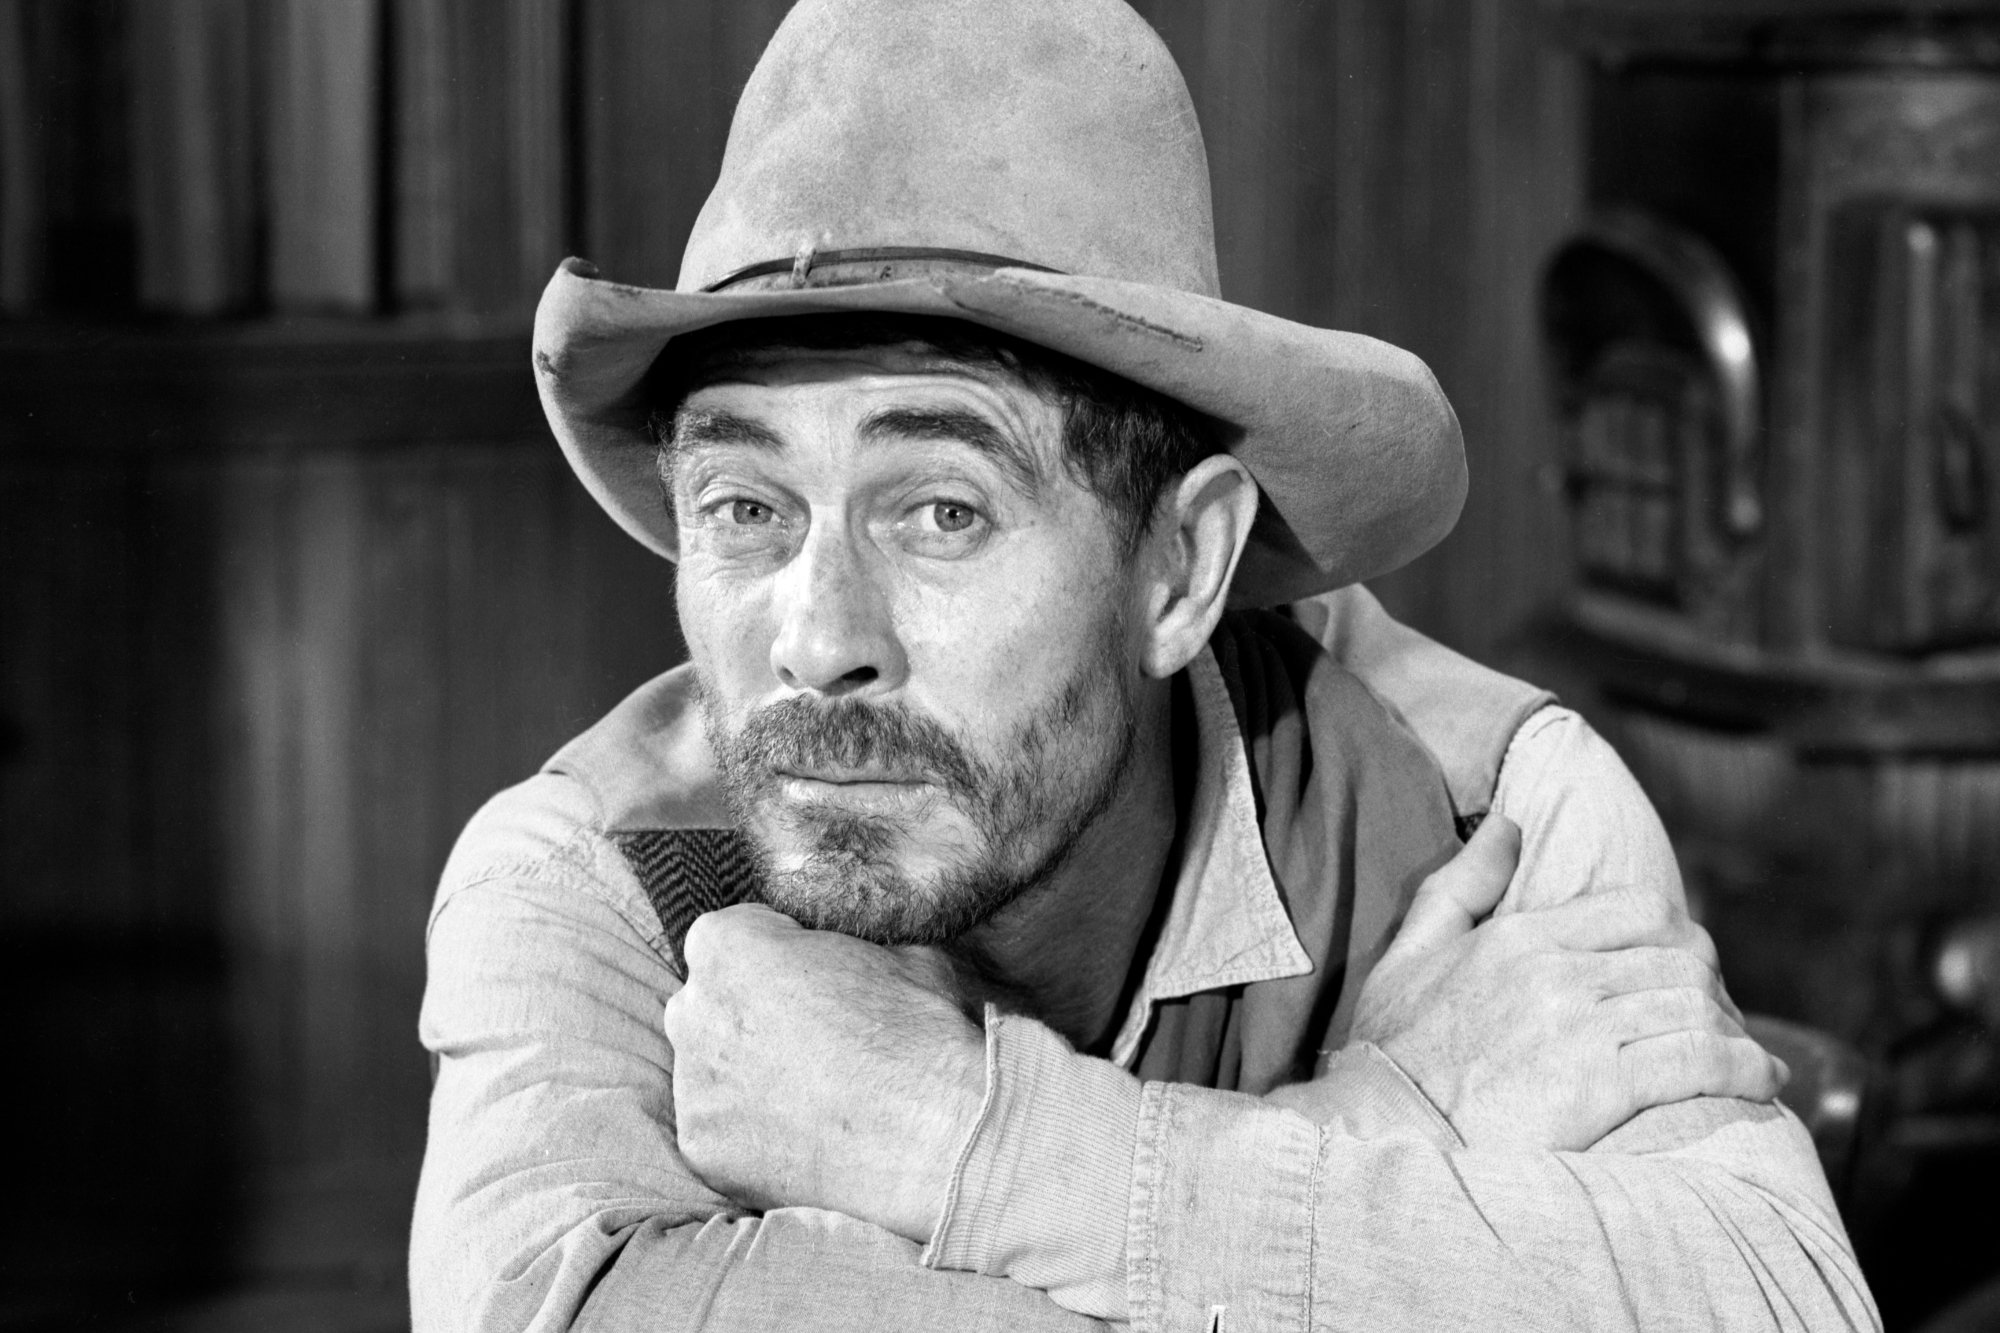 'Gunsmoke' Ken Curtis as Festus Haggen in Western costume. Resting his chin on his arms folded on a table.